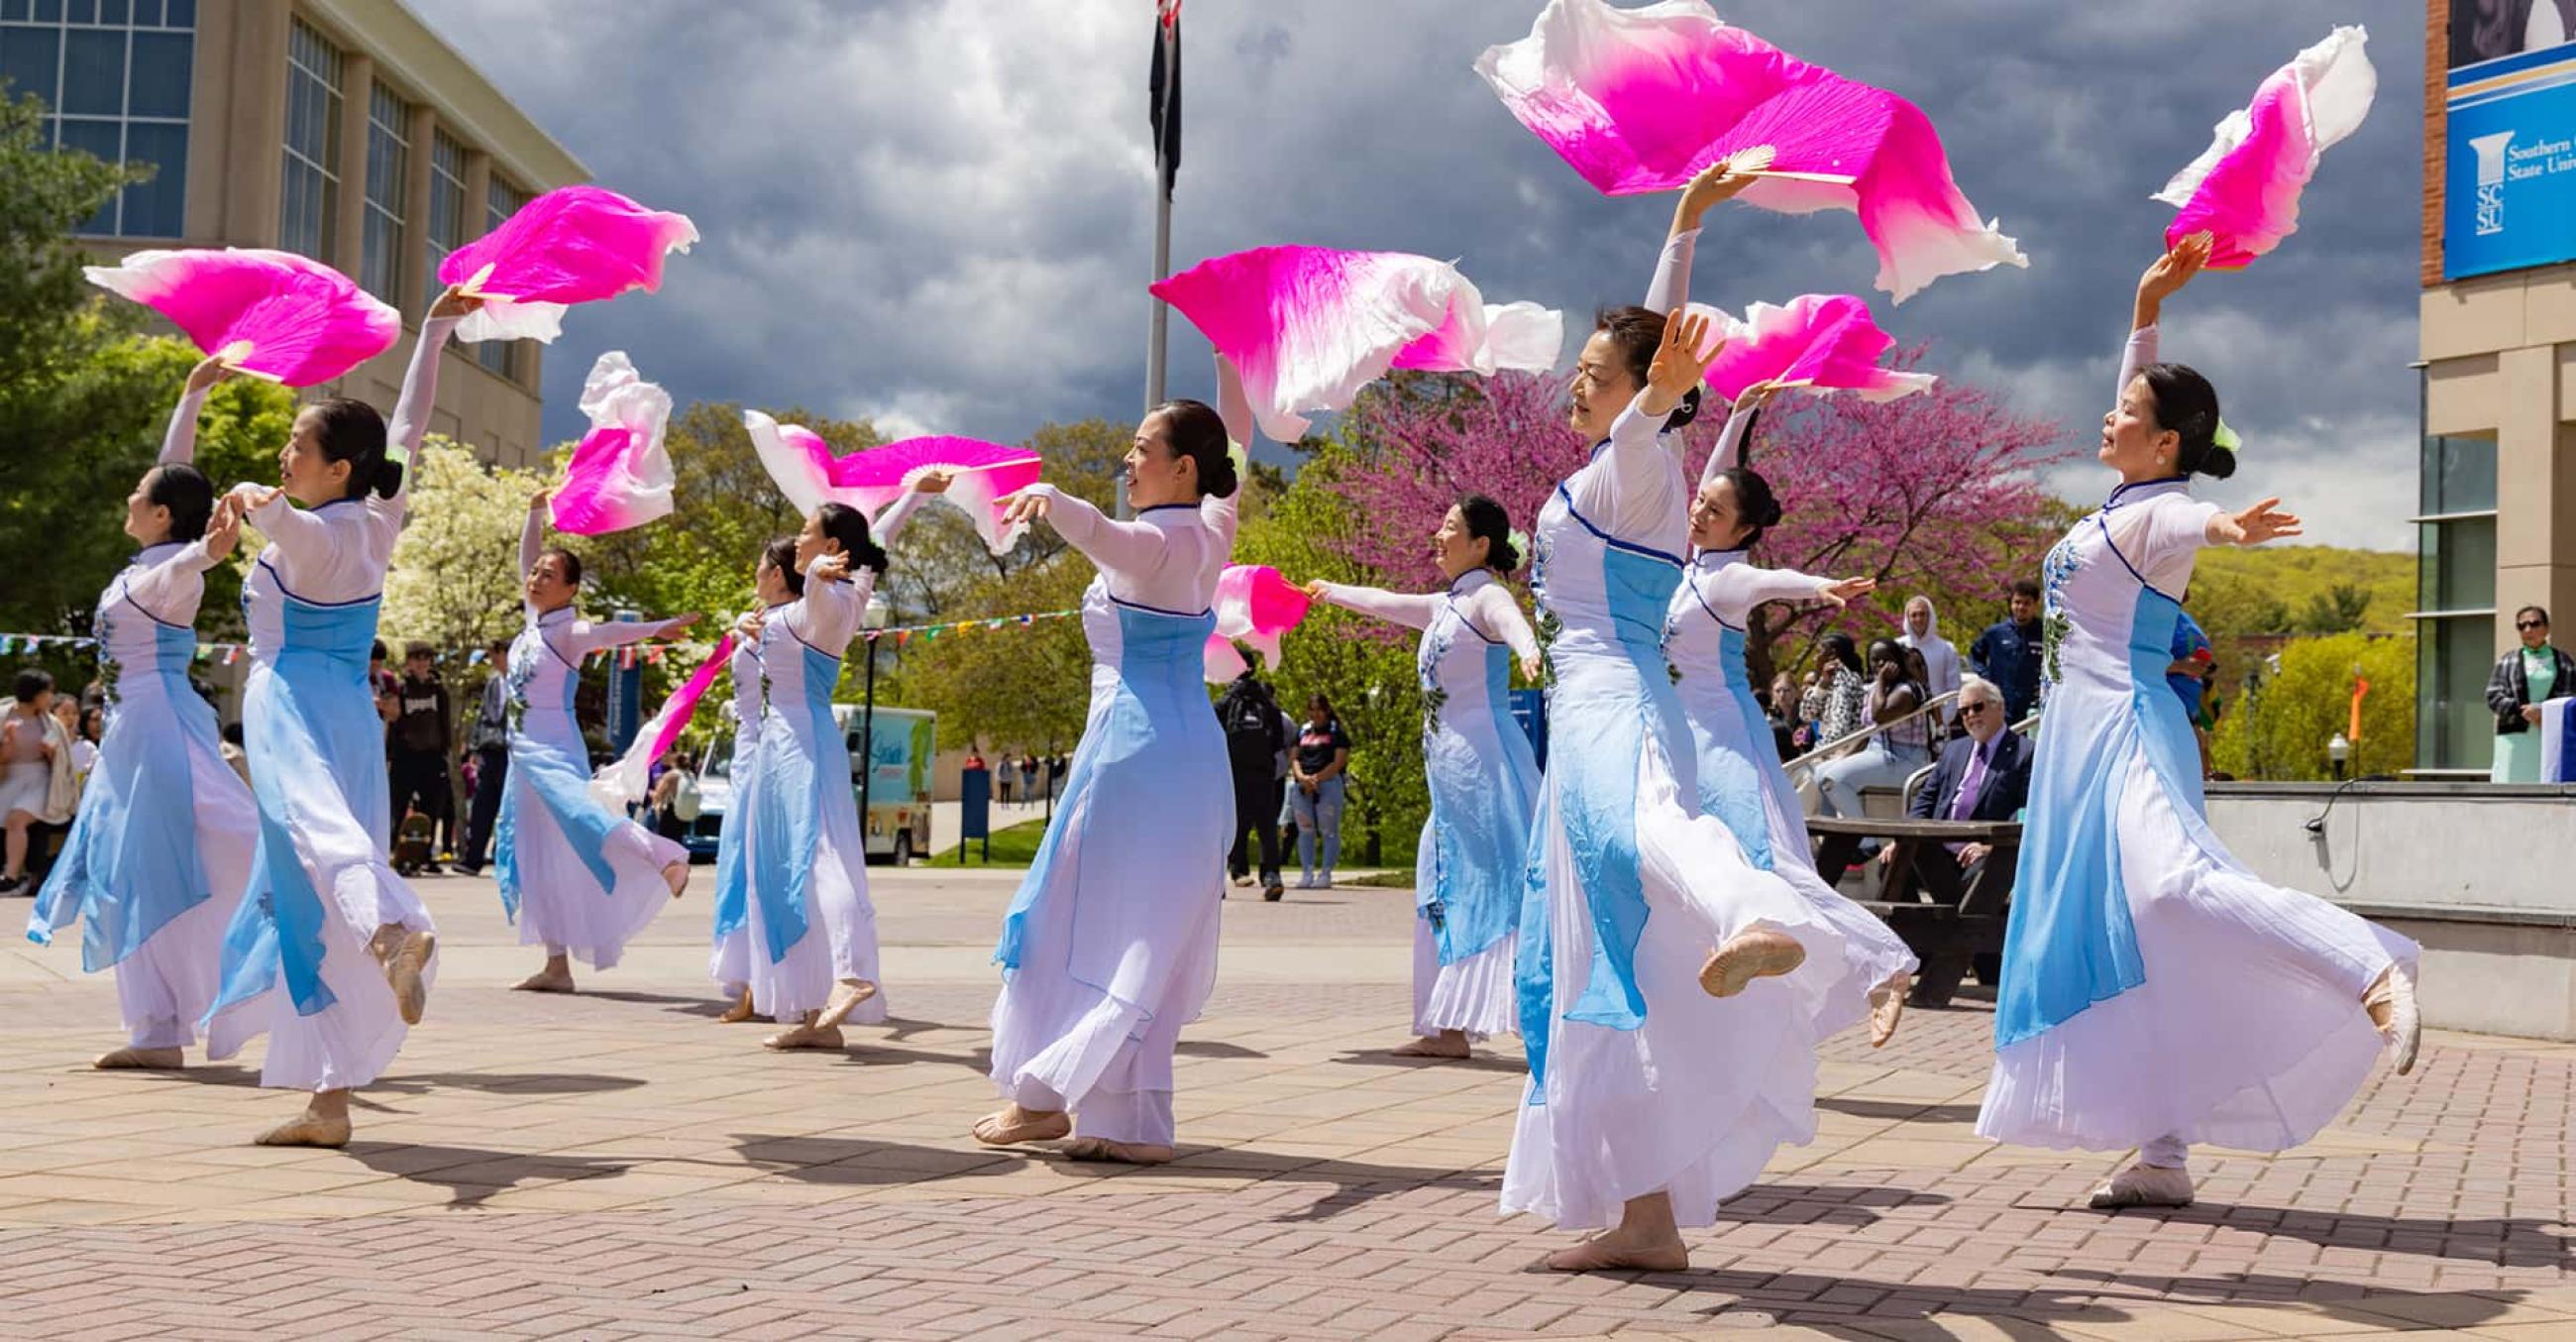 A group of dancers in traditional Asian costume dance with pink fans outdoors on Buley Patio